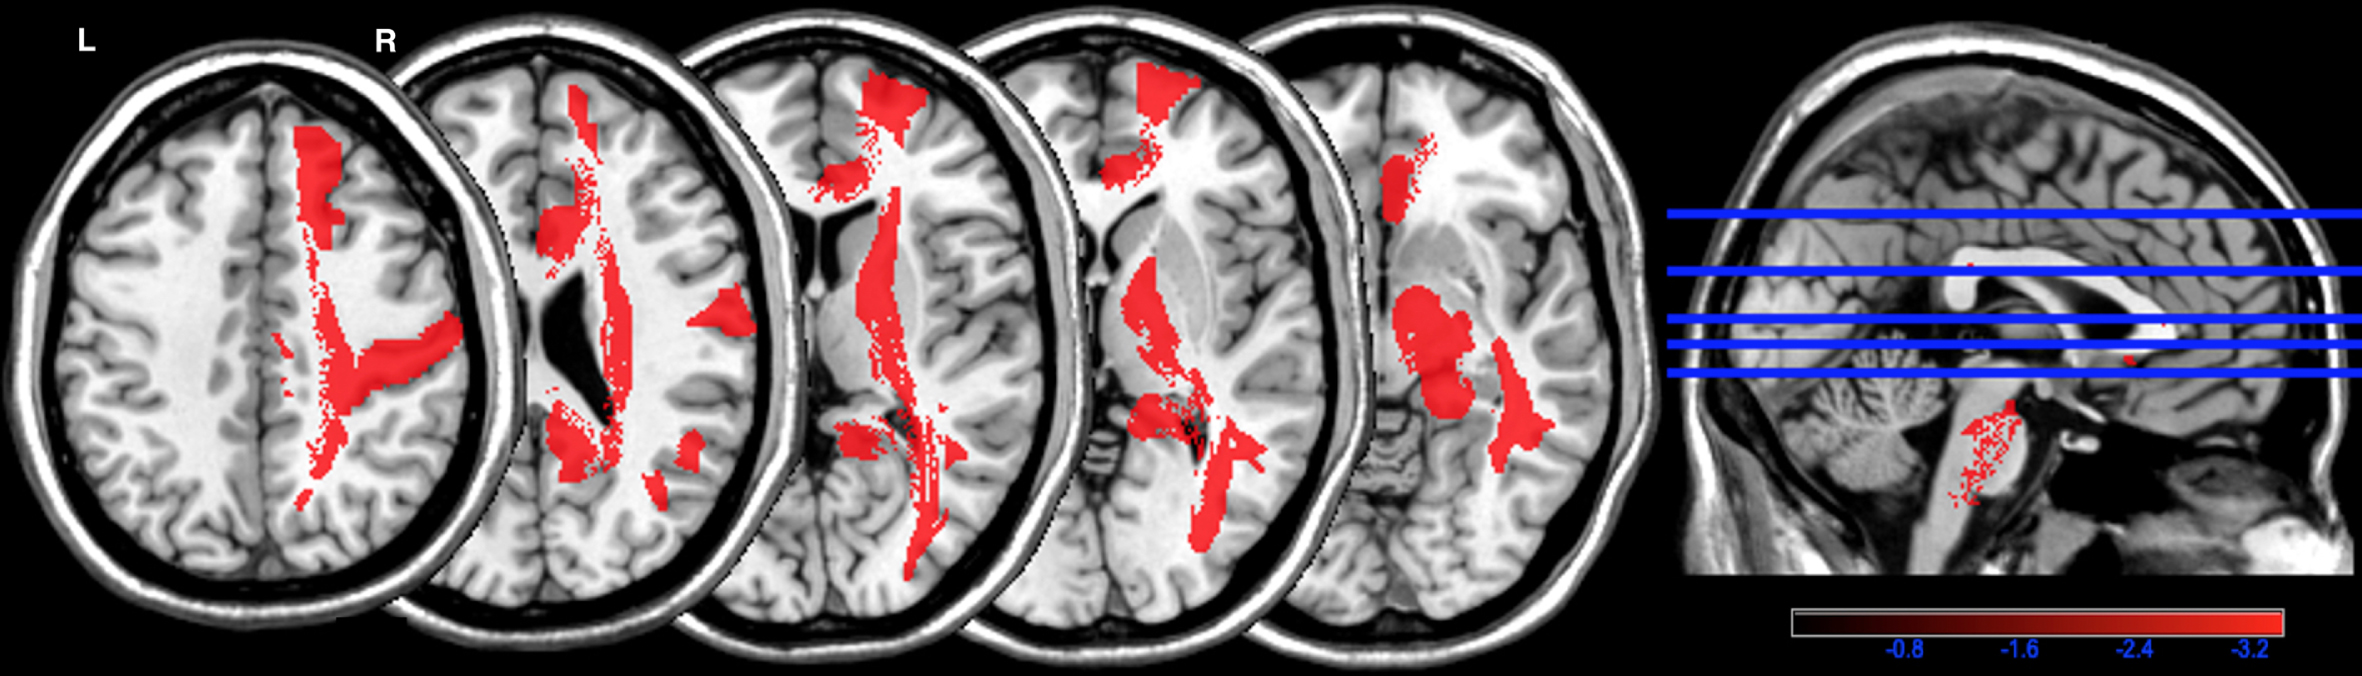 Parcel-based white matter hyperintensities symptom mapping (PWMHSM) analysis of structures associated with the G3 overall summary score. Color bar: z-score analysis of the strength of the association between white matter hyperintensities and the G3 overall summary score in structures of the Automatic Anatomical Labelling (AAL) and NatbrainLab (CAT) atlases (superior frontal region (mean z = –3.74), postcentral region (mean z = –3.71), cingulum (mean z = –3.56), cortico-spinal tract (mean z = –3.57), inferior longitudinal fasciculus (mean z = –3.62), internal capsule (mean z = –3.39), and posterior segment of the arcuate fasciculus (mean z = –3.41)). R, right; L, left.